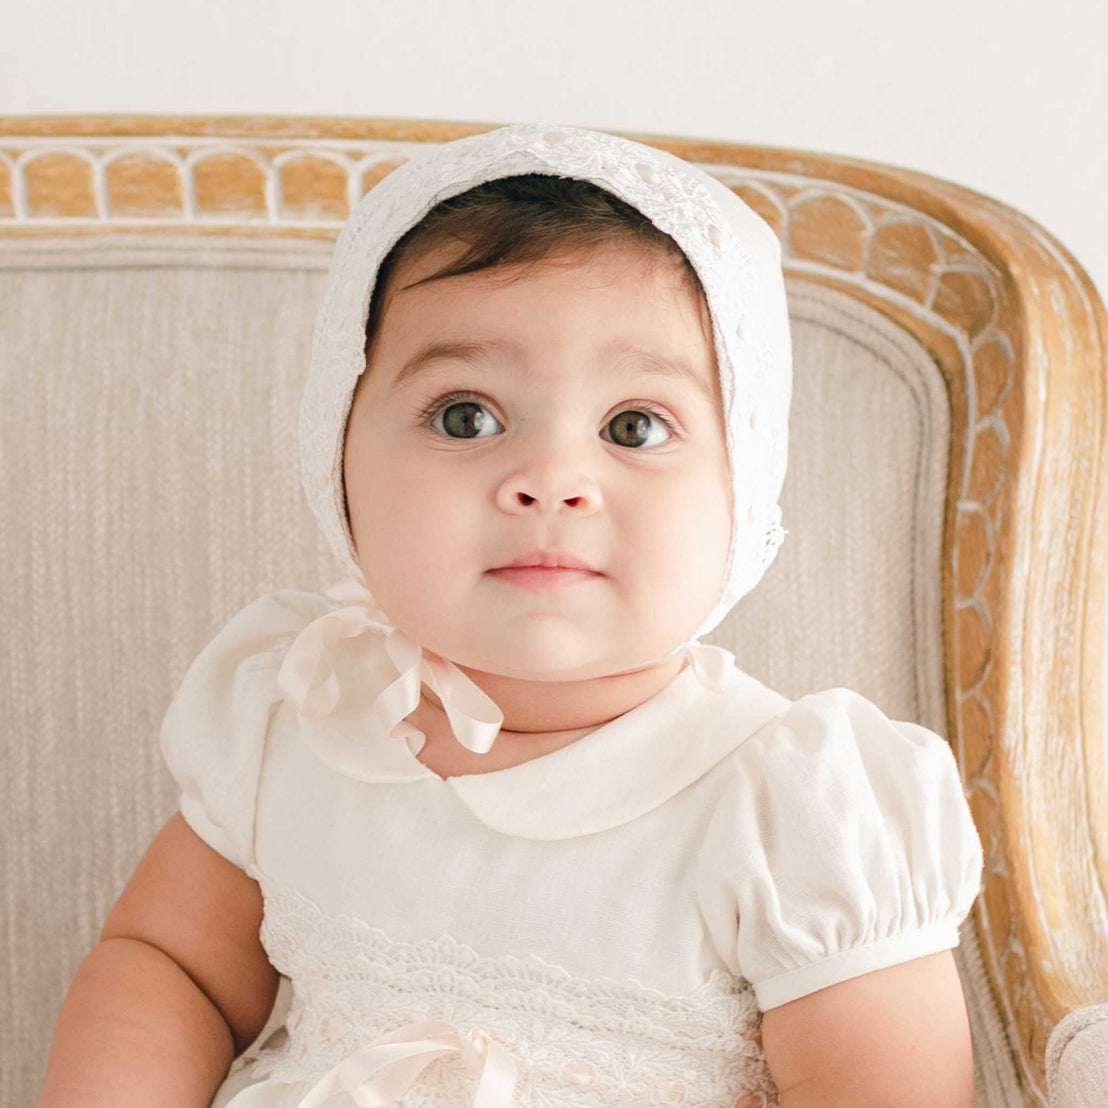 A newborn with big eyes wearing a white christening dress and Emma Bonnet sits on an antique chair, looking up with a curious expression.